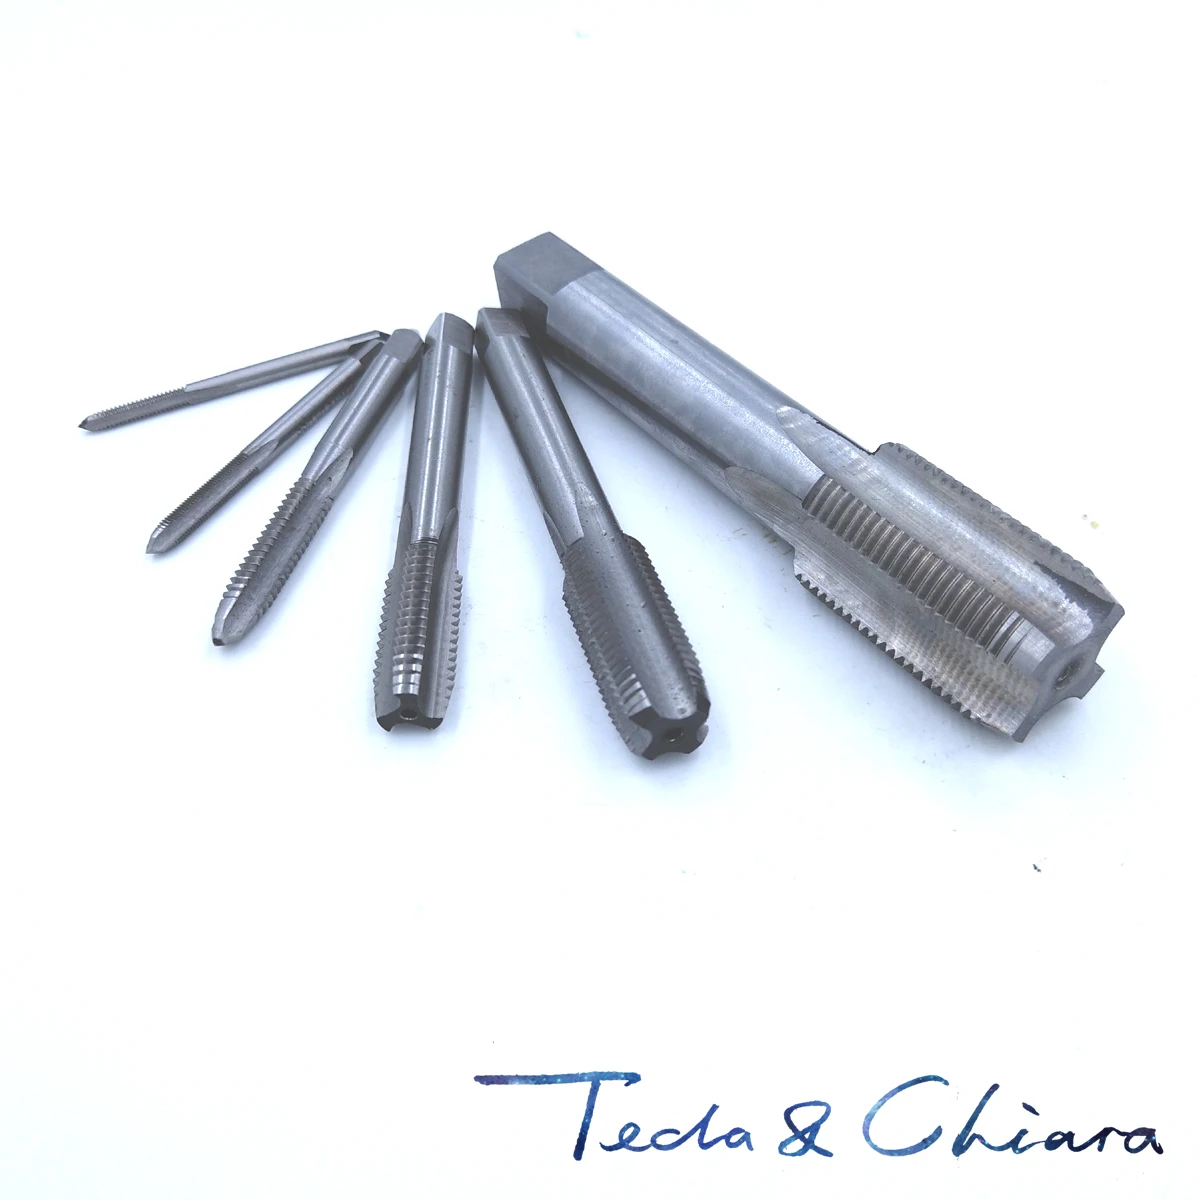 5/8-28 5/8-32 5/8-36 5/8-40 UN UNS HSS Right hand Tap TPI Threading Tools For Mold Machining 5/8 5/8" - 28 32 36 40